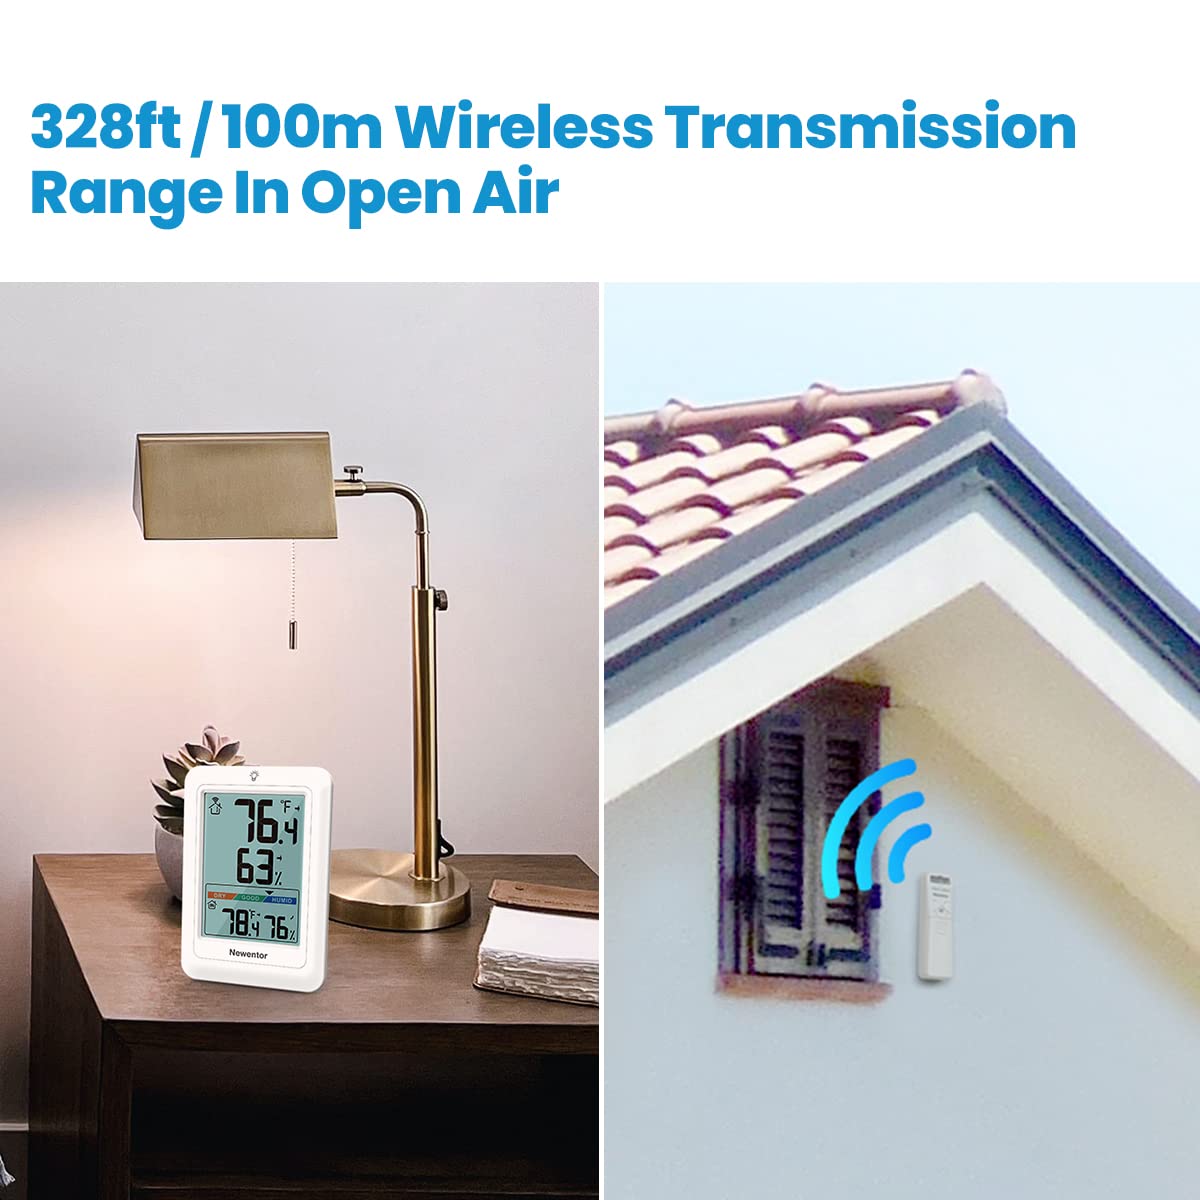 Newentor® Home Weather Station Q8 - Wireless Atomic All-In-1